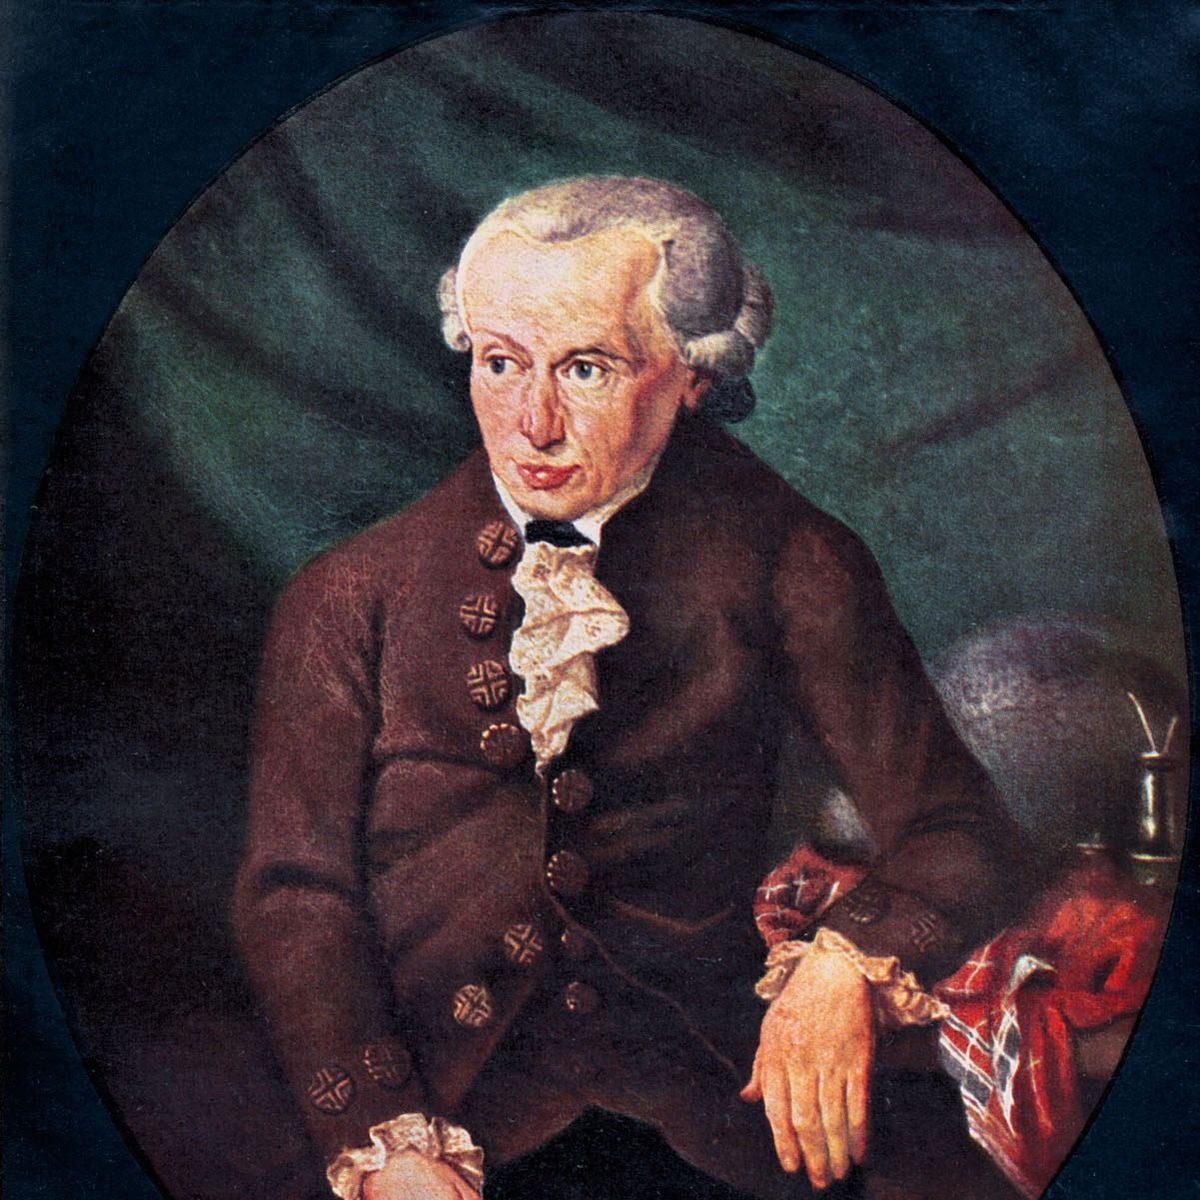 Immanuel Kant - Theories, Book & Facts